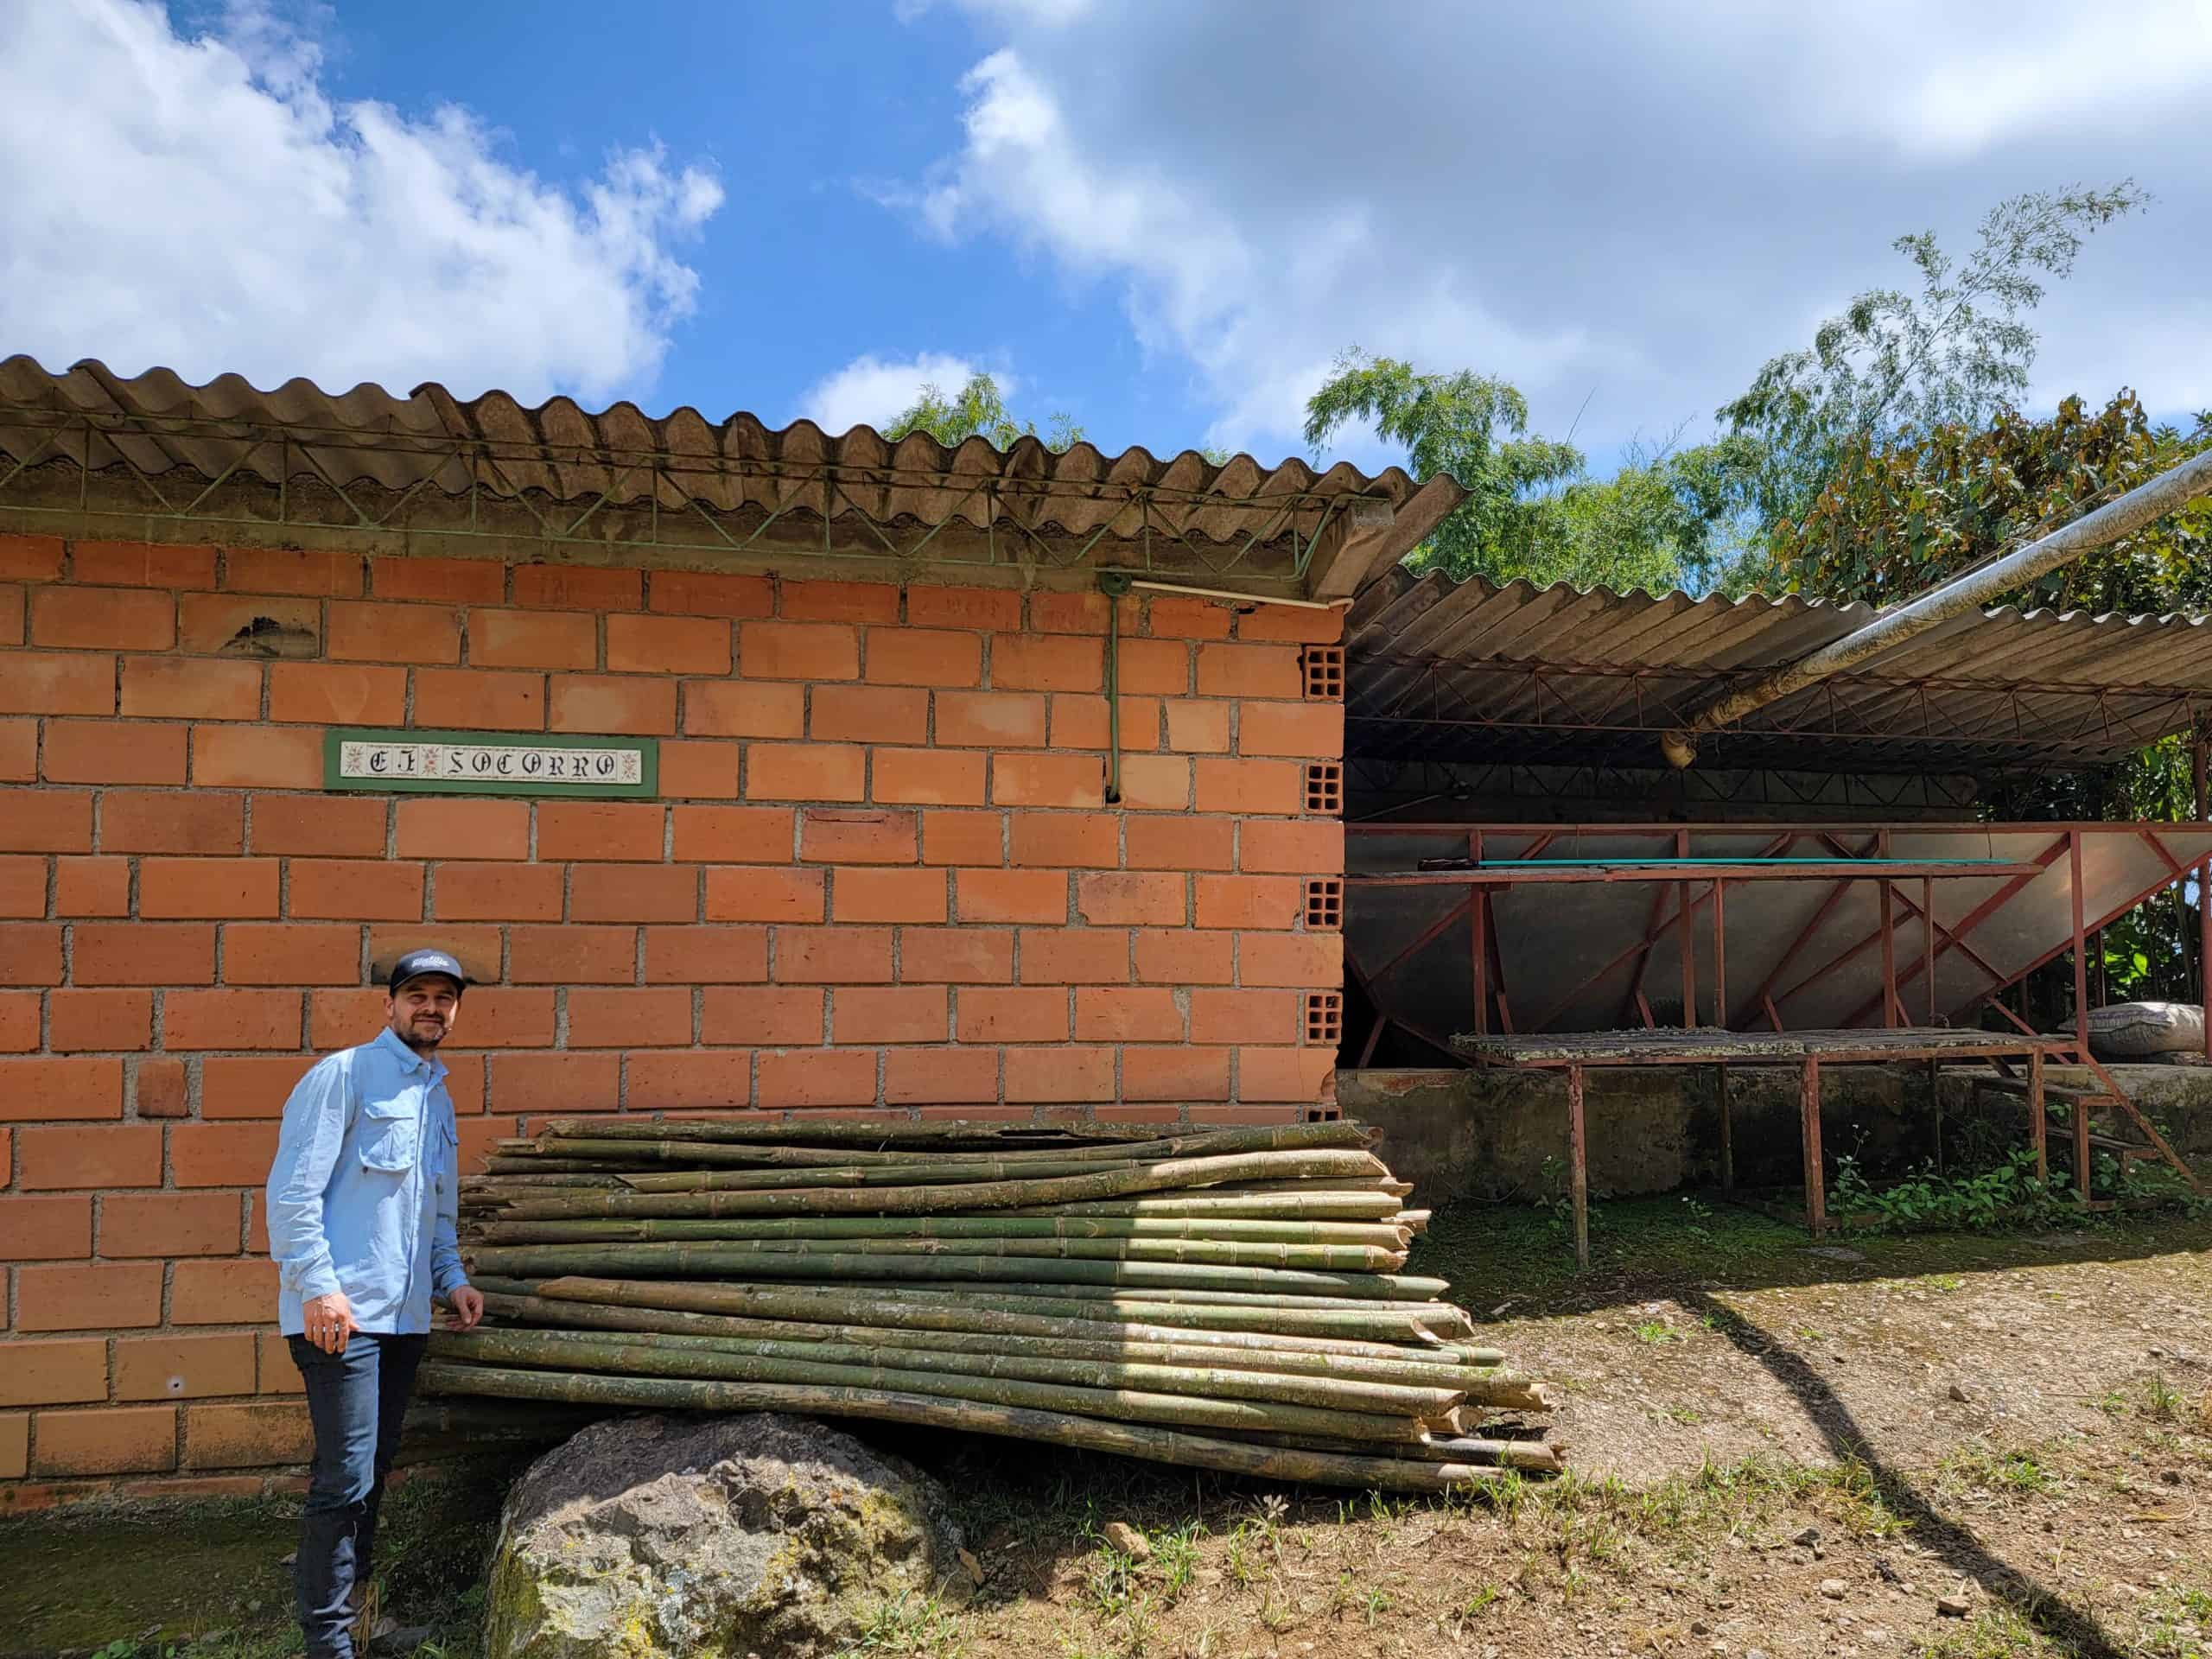 picture showing Miguel Echeverri, Hatillo Coffee's co-founder and Chief Quality Officer, at "El Socorro" coffee farm near Fredonia Antioquia